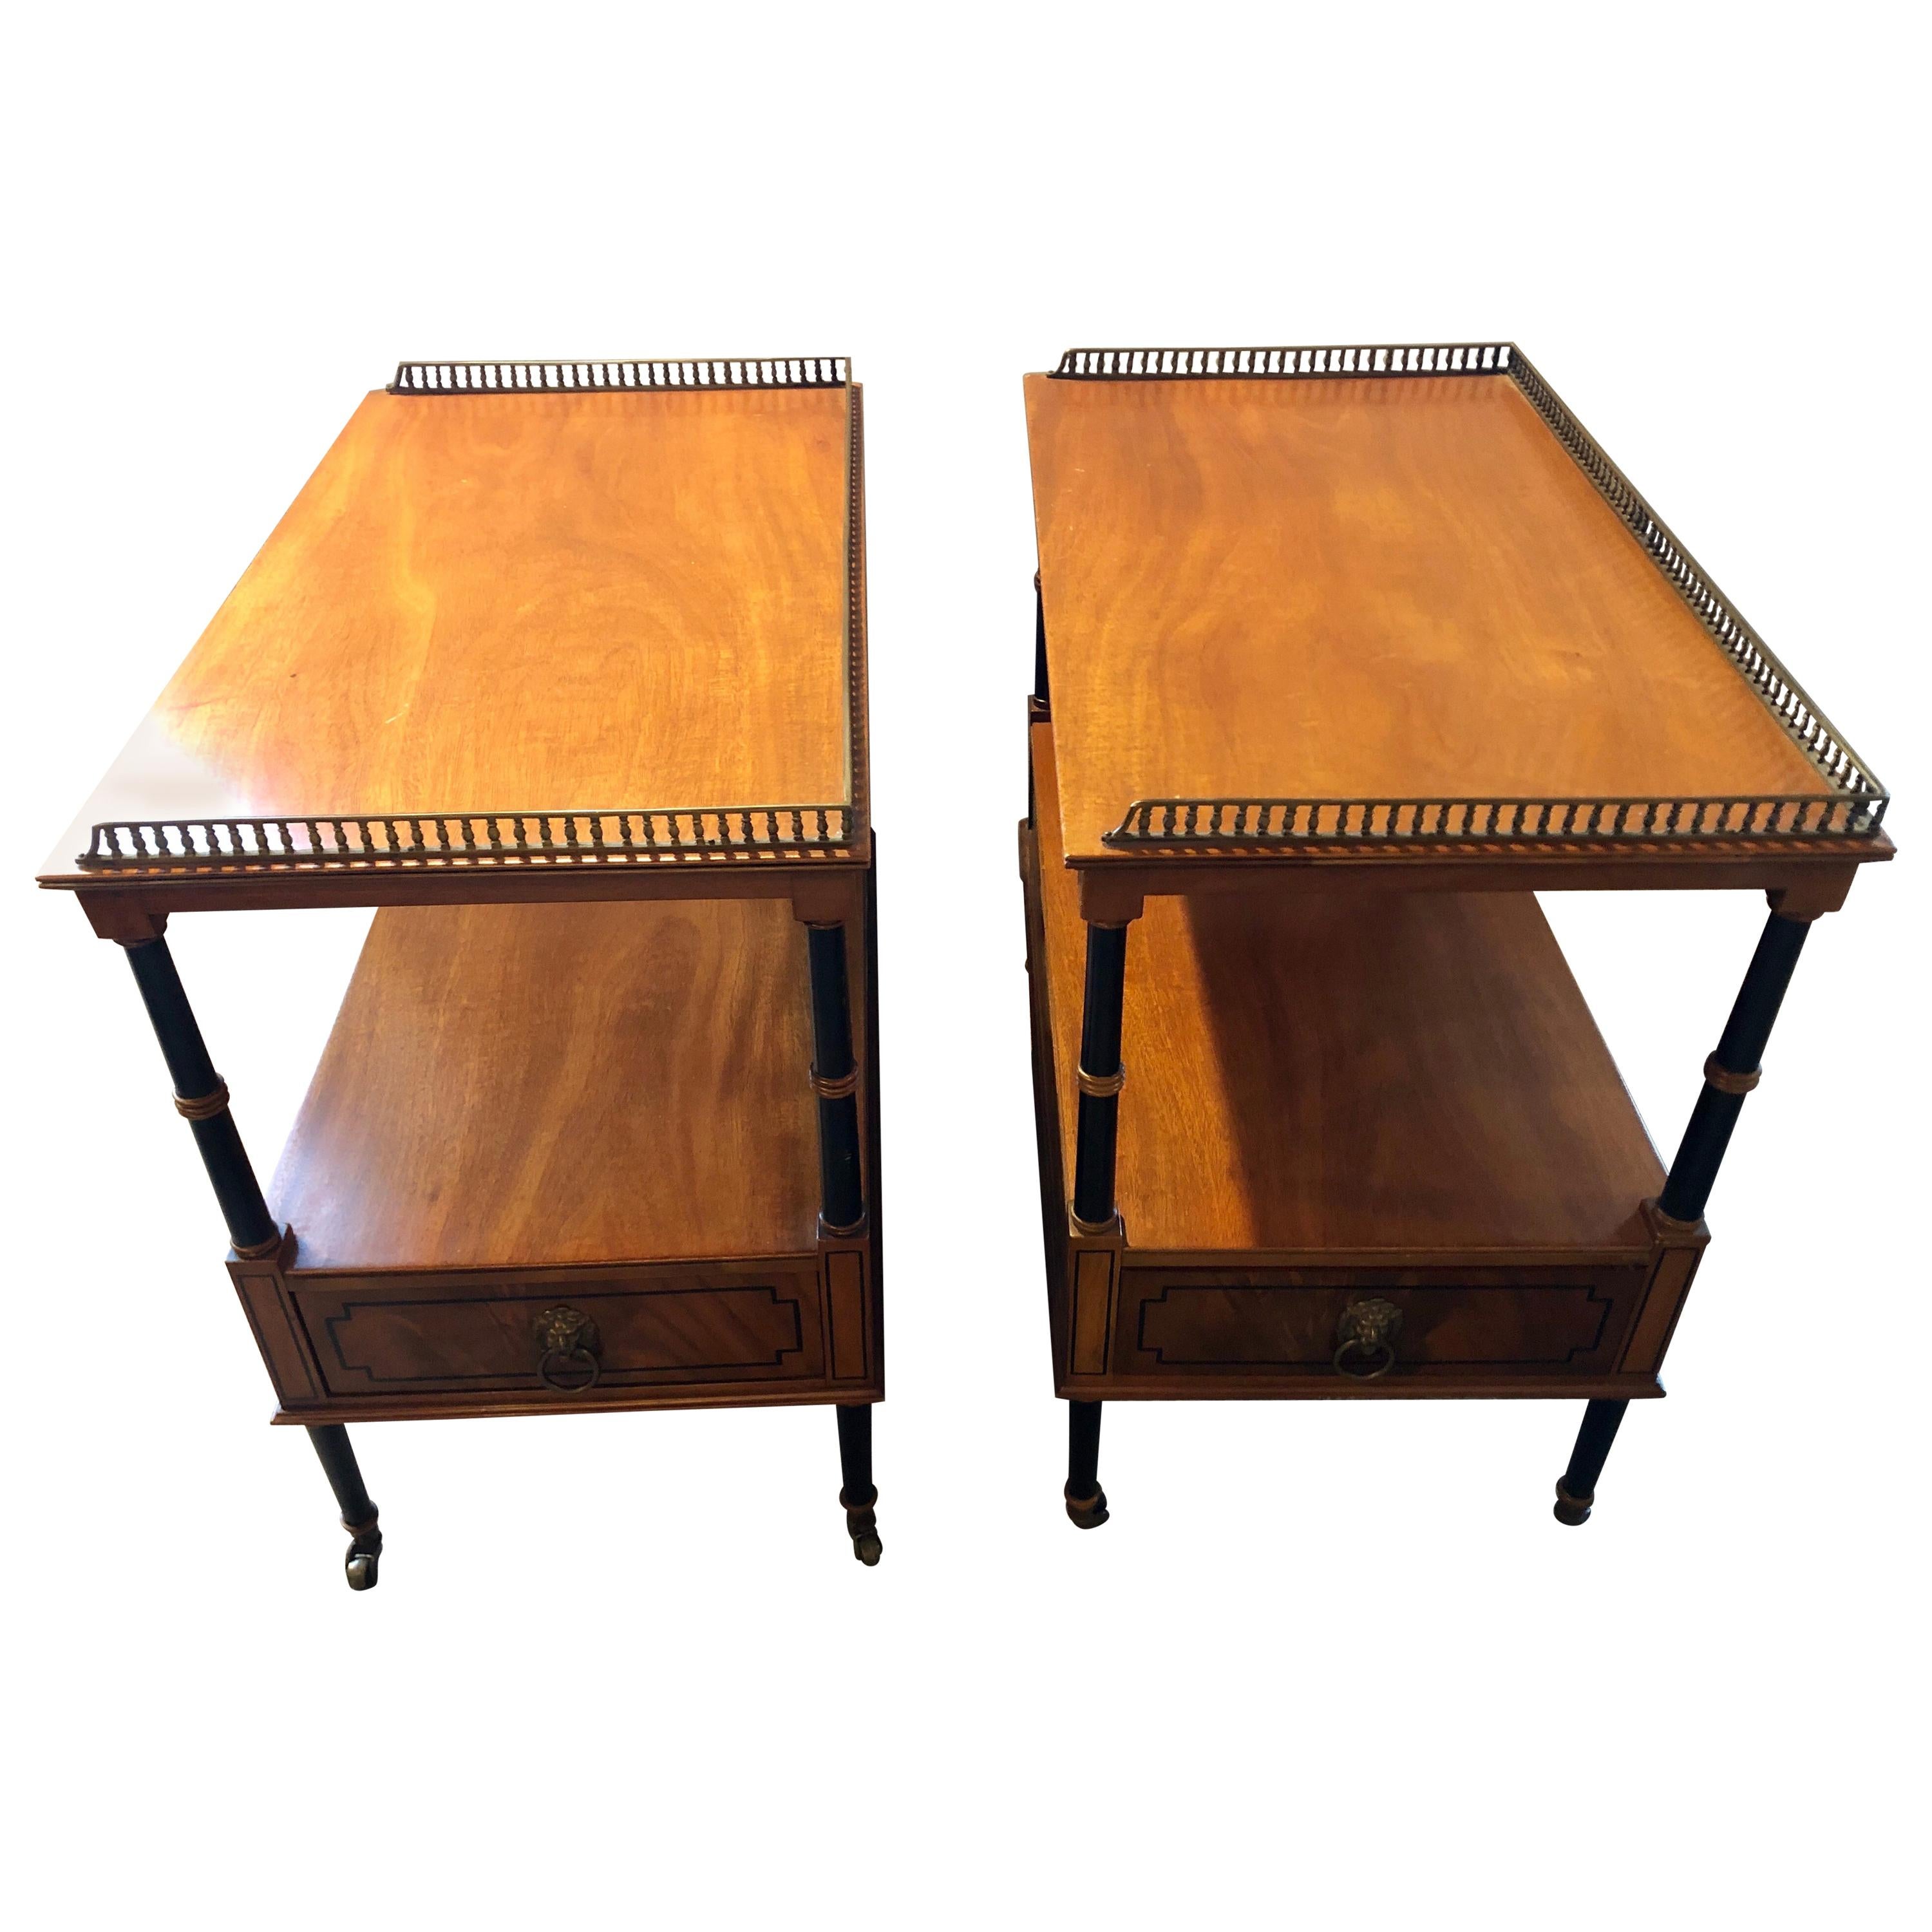 Pair of Beacon Hill Mahogany and Ebony Galleried Stands with Side Drawers